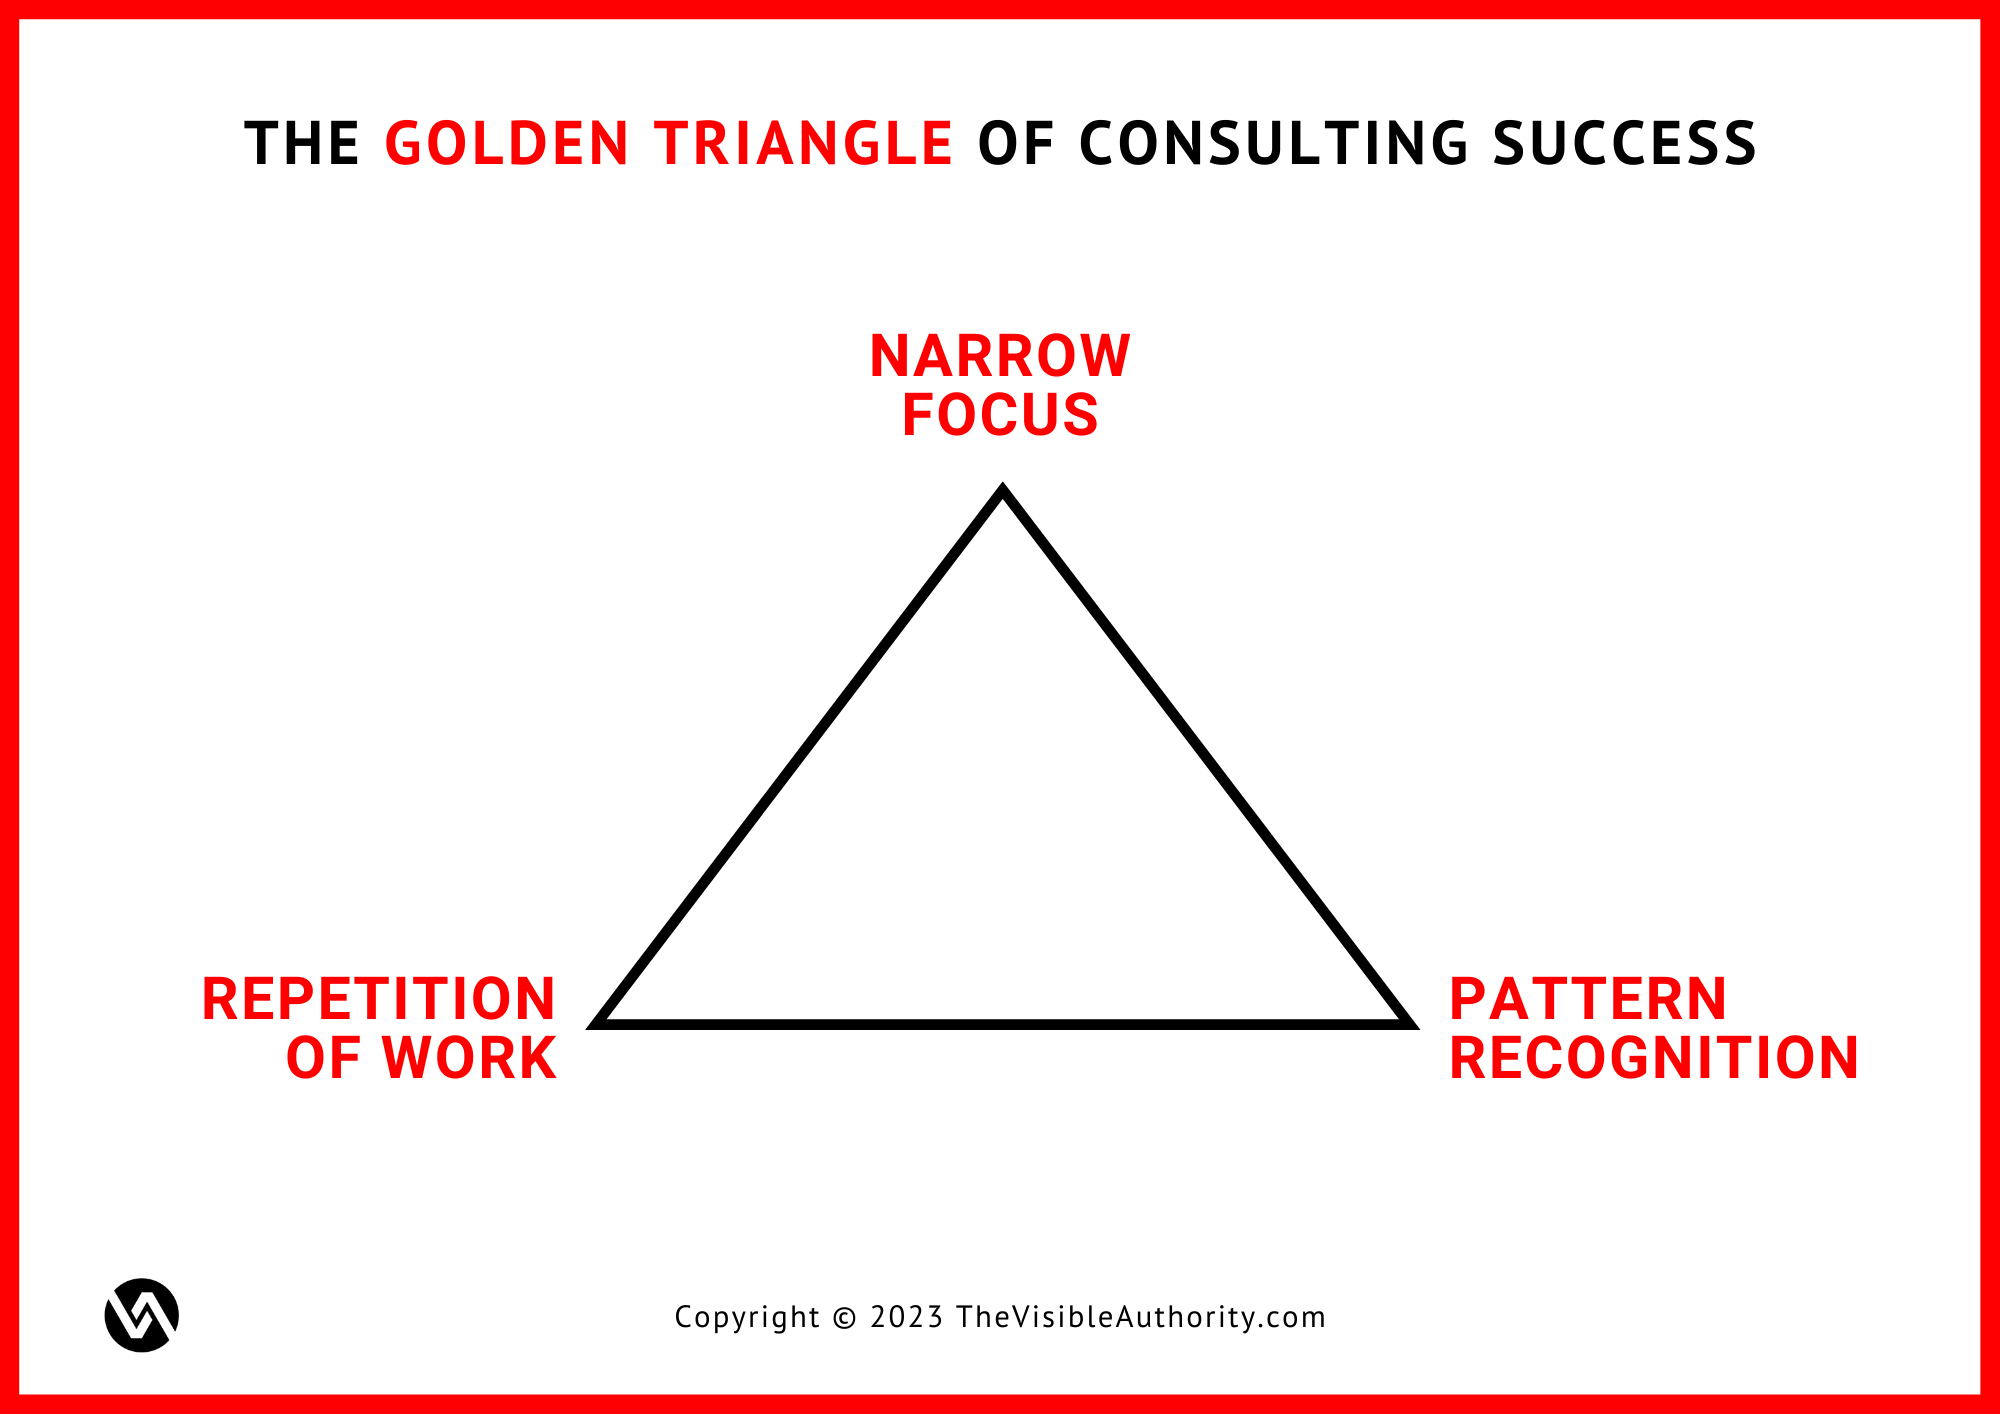 The golden triangle of consulting success